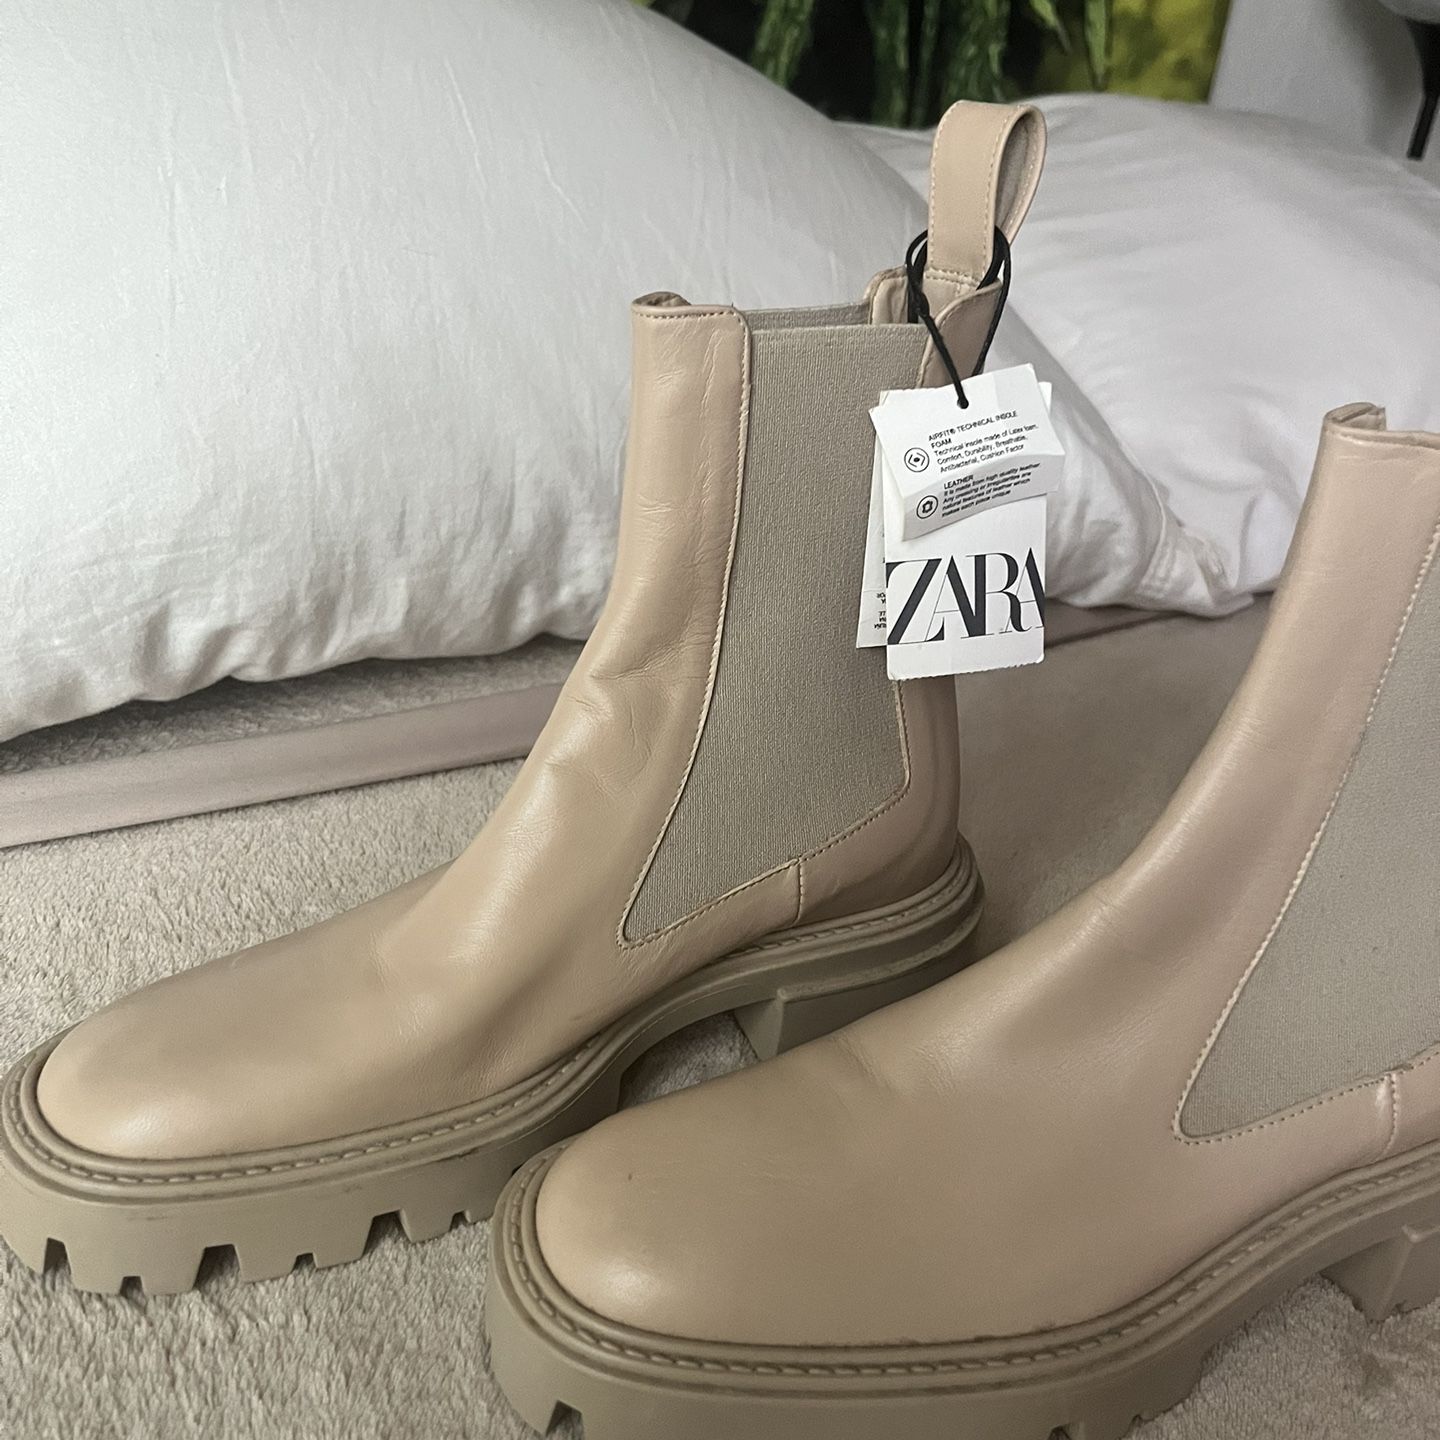 Zara Boots Size 6 1/2 for Sale in San Diego, CA - OfferUp